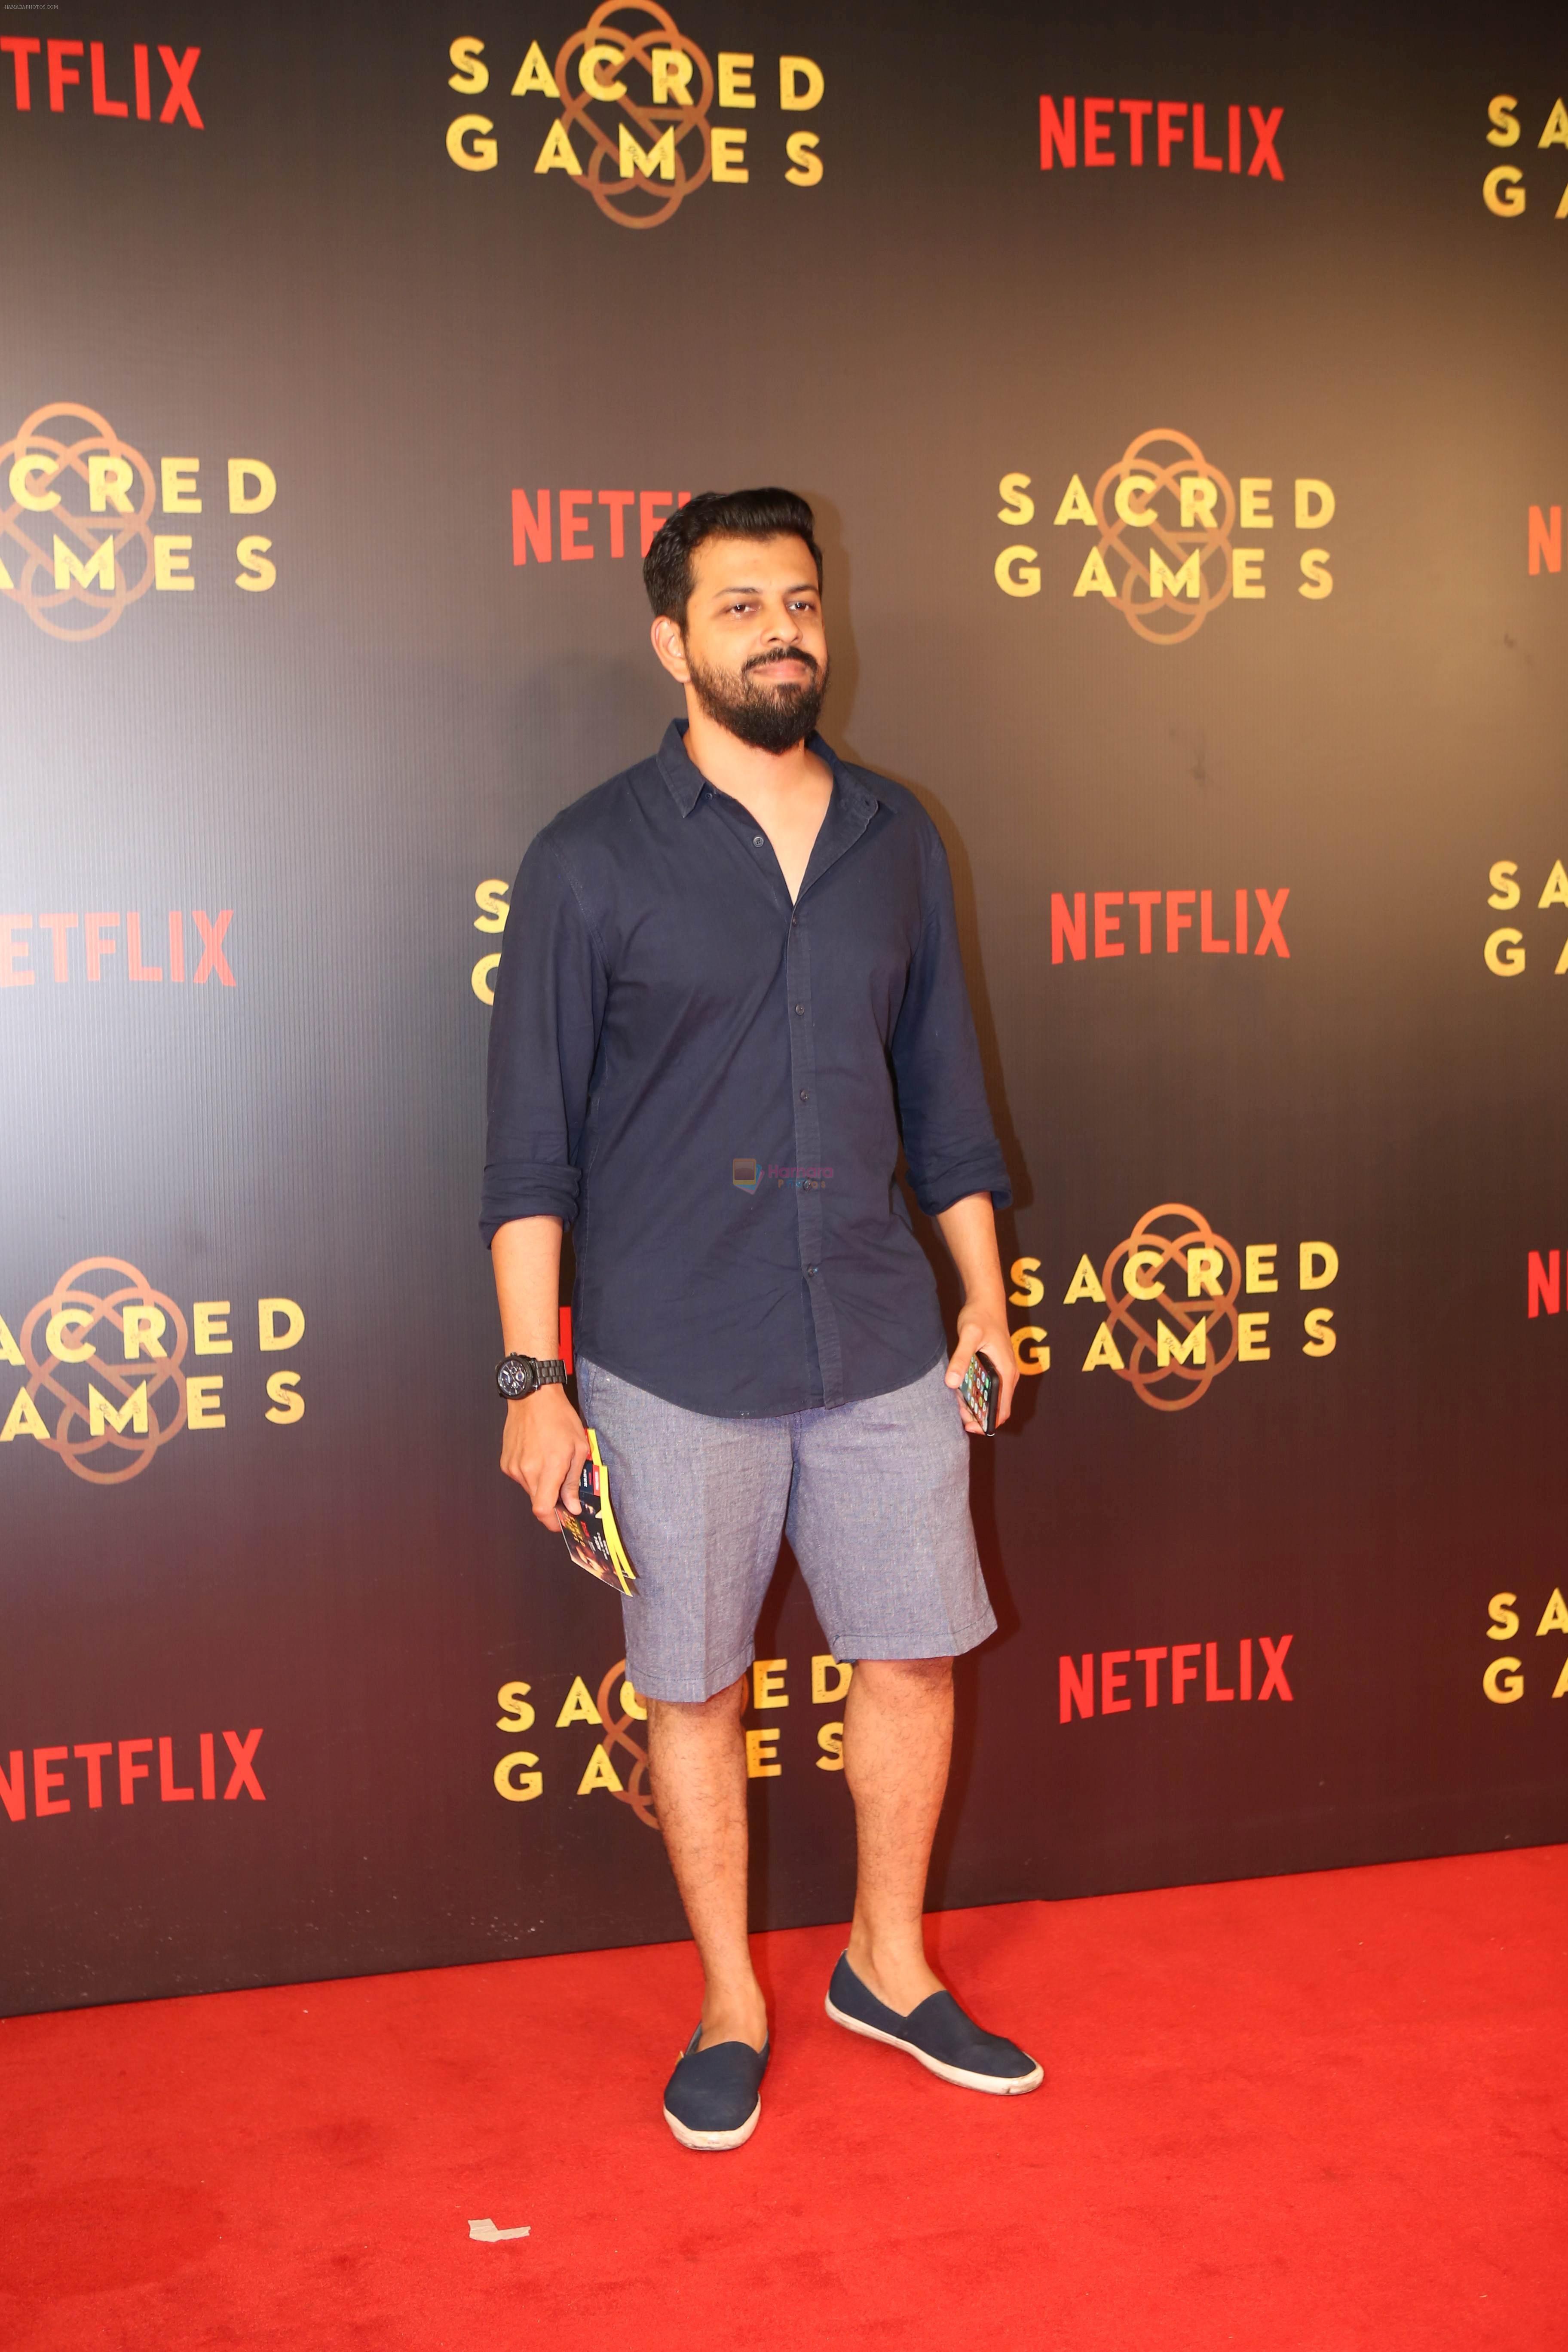 Bejoy Nambiar at the Screening of Netflix Sacred Games in pvr icon Andheri on 28th June 2018